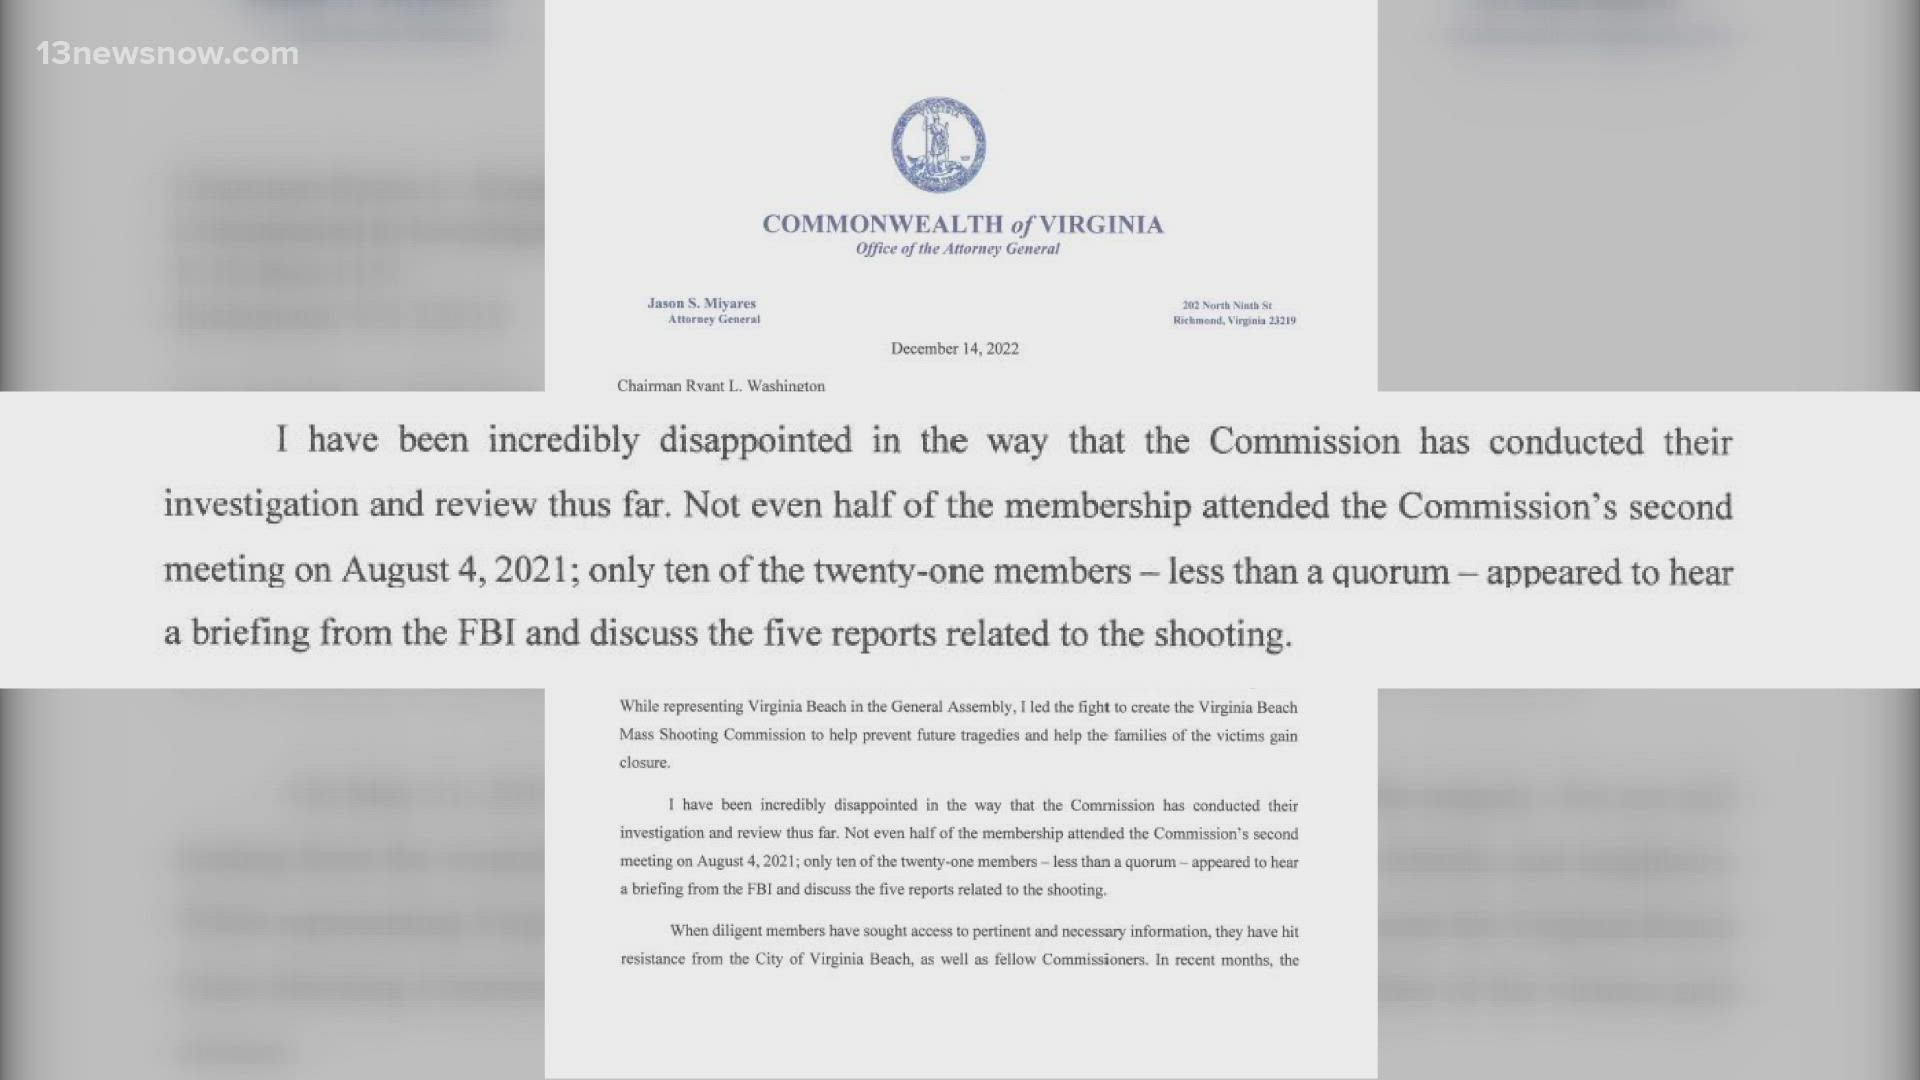 In a letter to the Virginia Beach Mass Shooting State Commission, Jason Miyares said he's concerned with their lack of members and progress.